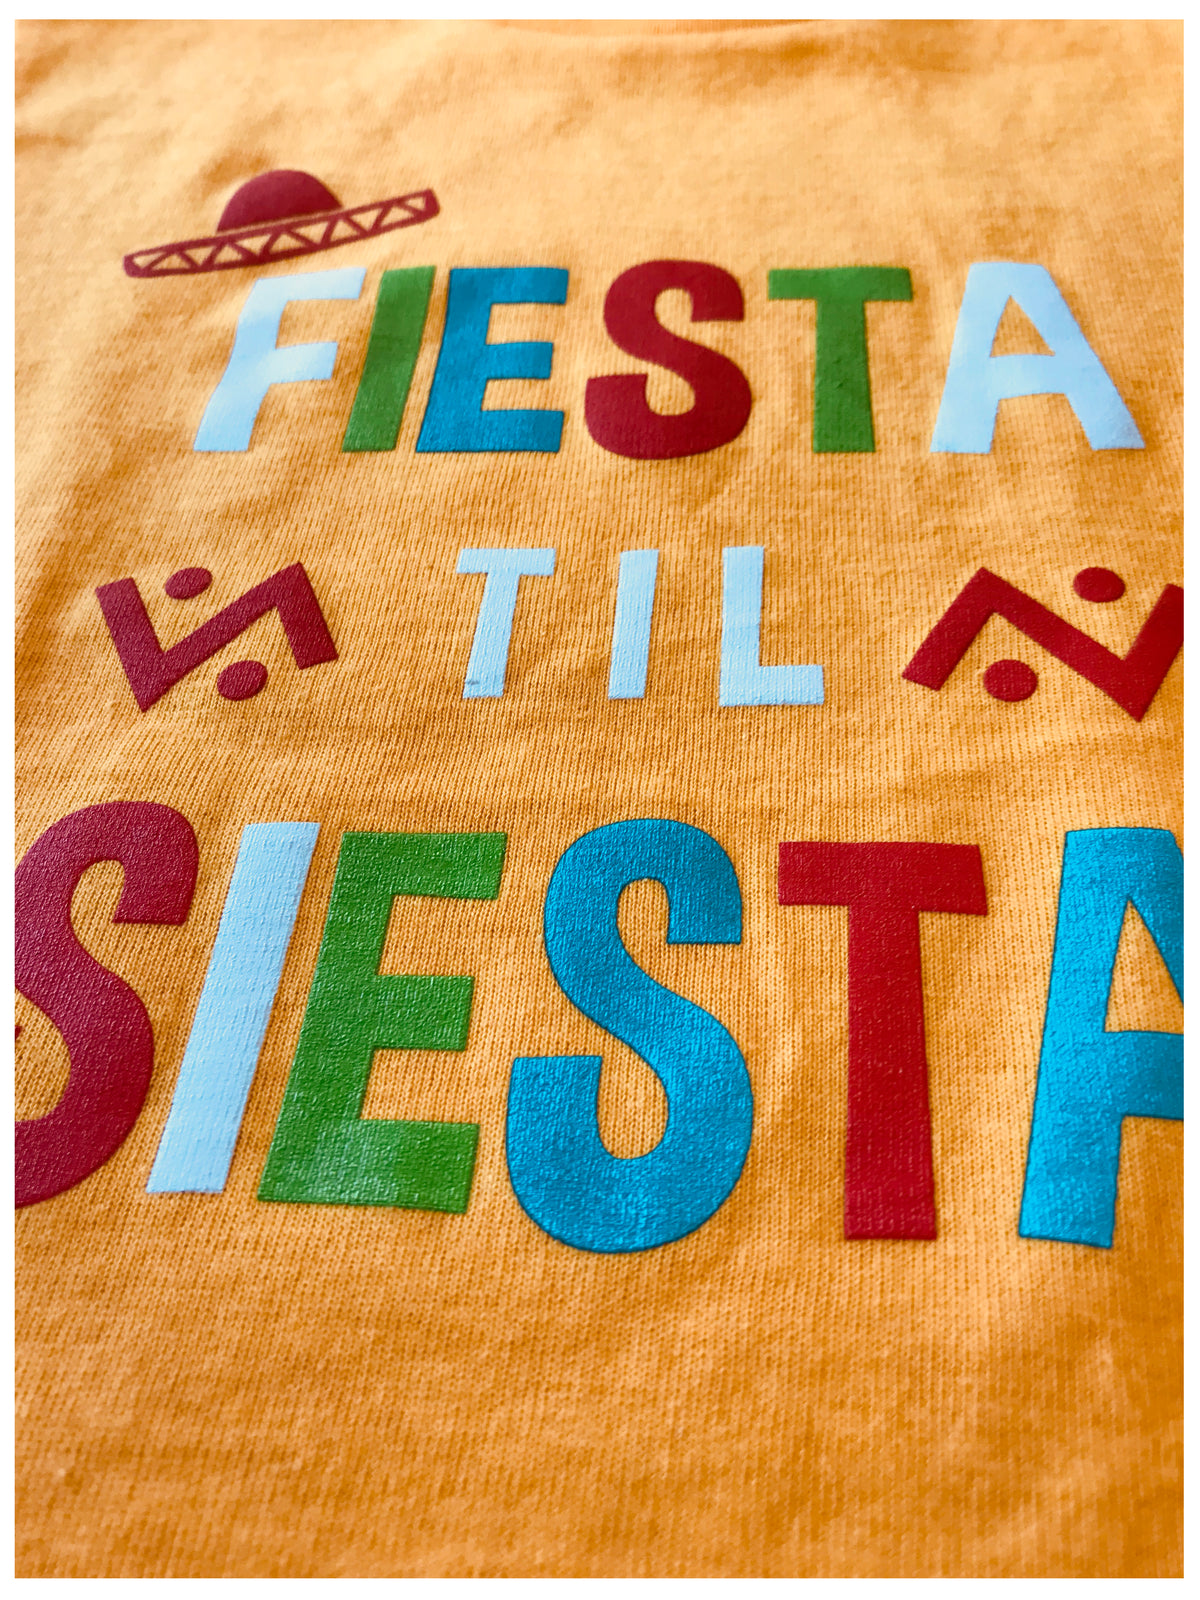 Fiesta til' Siesta | Cute Funny Napping Nap Time Party Toddler Boy Girl T-shirt